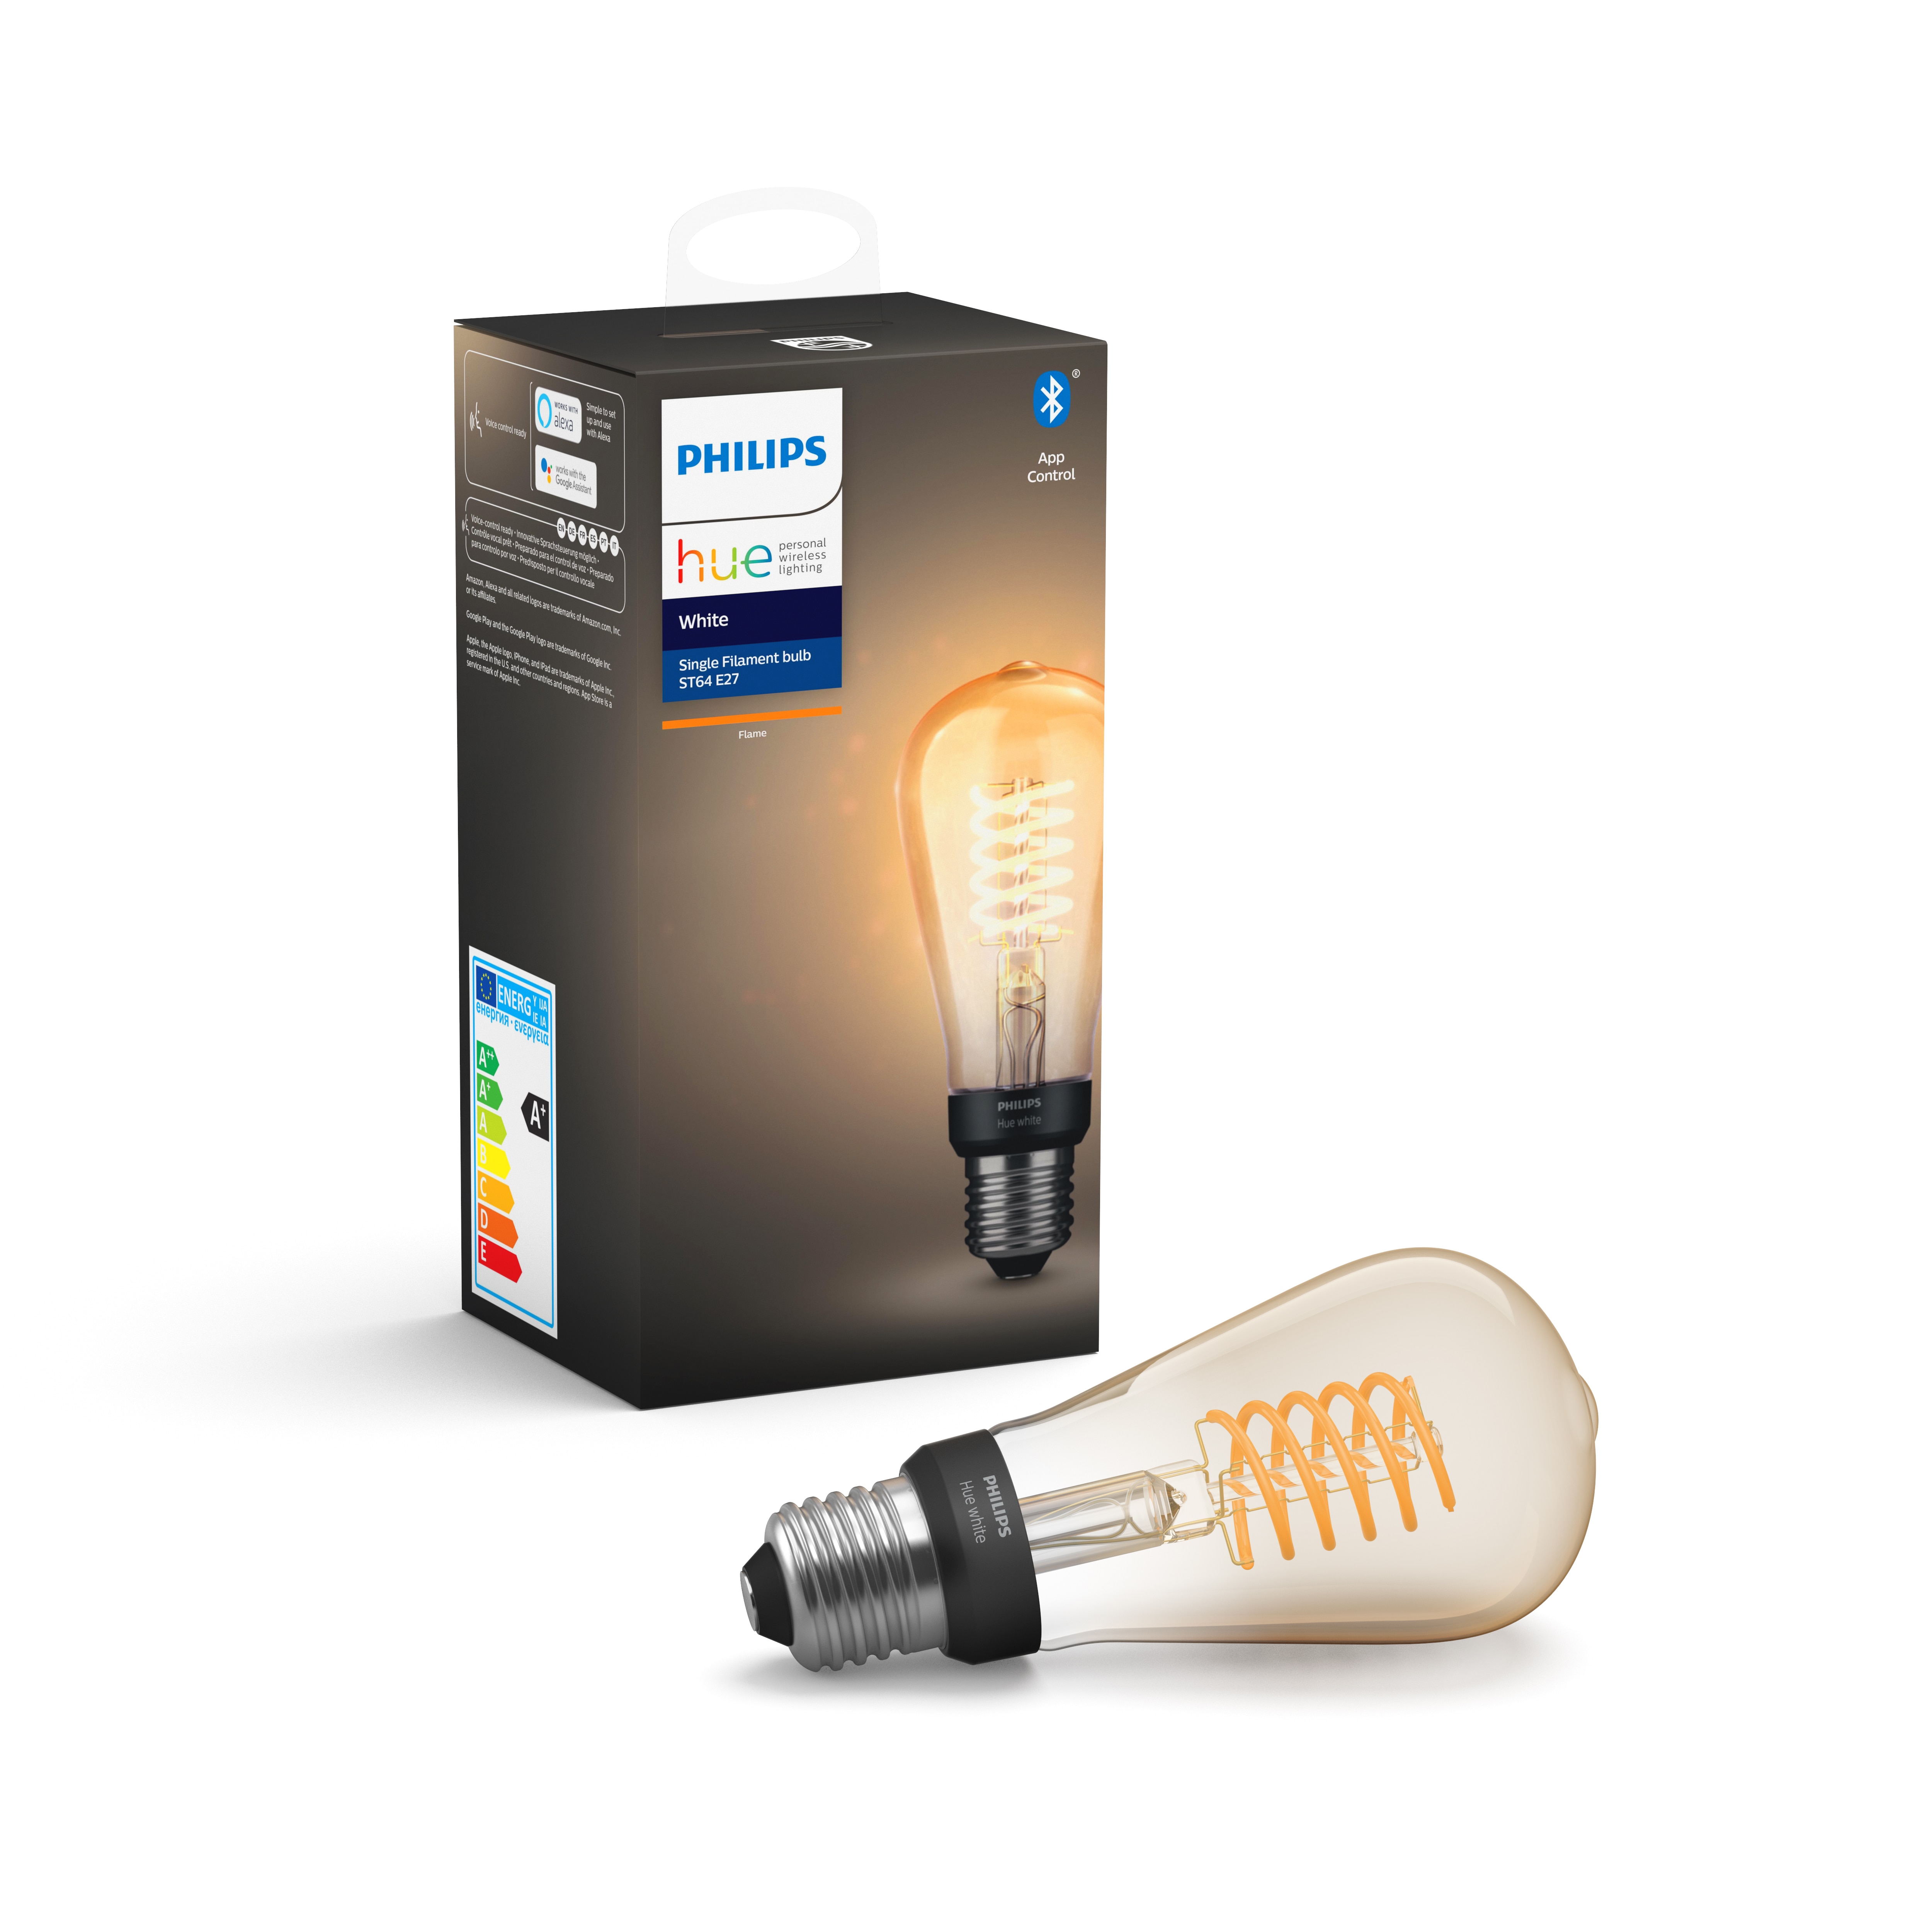 The Philips Hue collection: bring vintage style to your smart | Signify Company Website